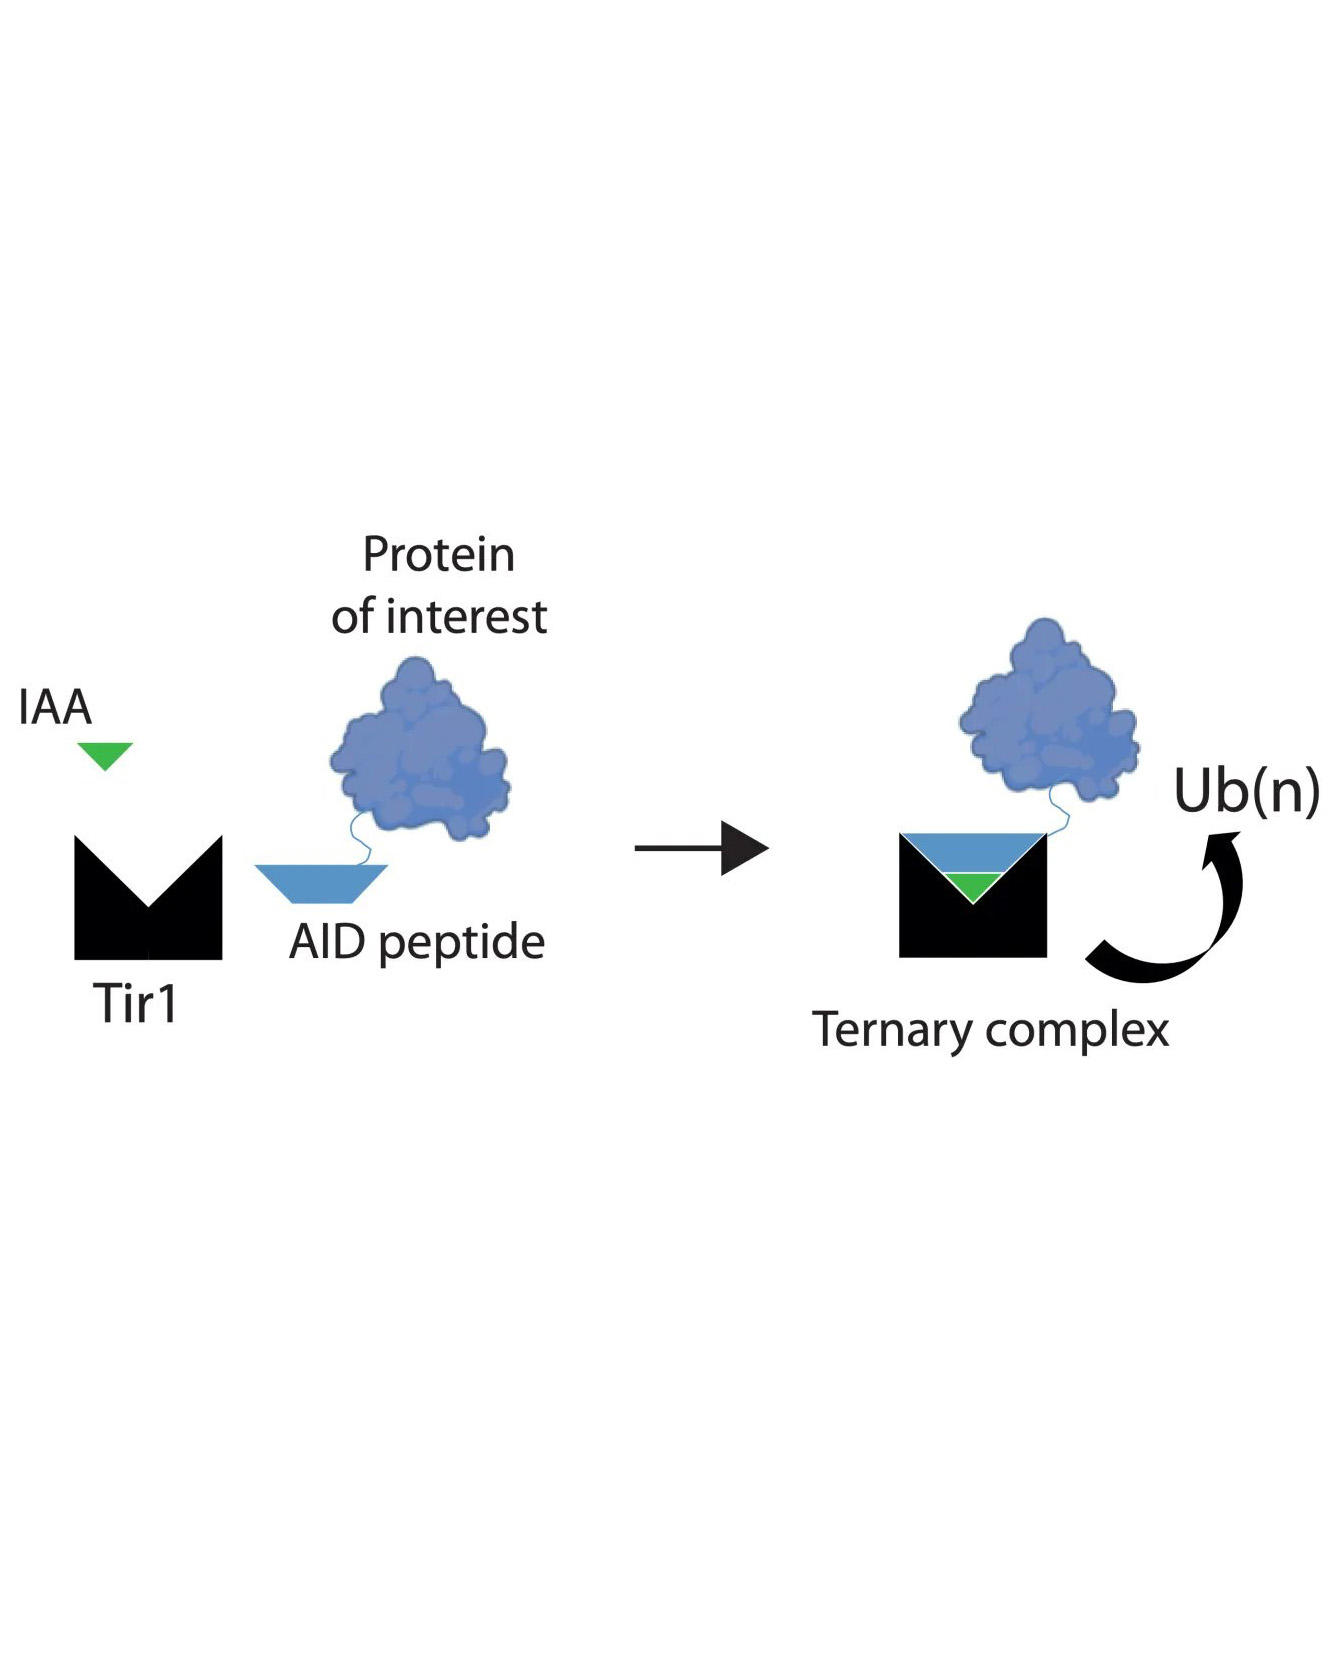 Schematic diagram illustrates the assembly of the Tir1 substrate receptor protein, IAA ligand and AID tagged target protein-of-interest into a ternary complex necessary for target protein ubiquitination via SCFTir1 and degradation.